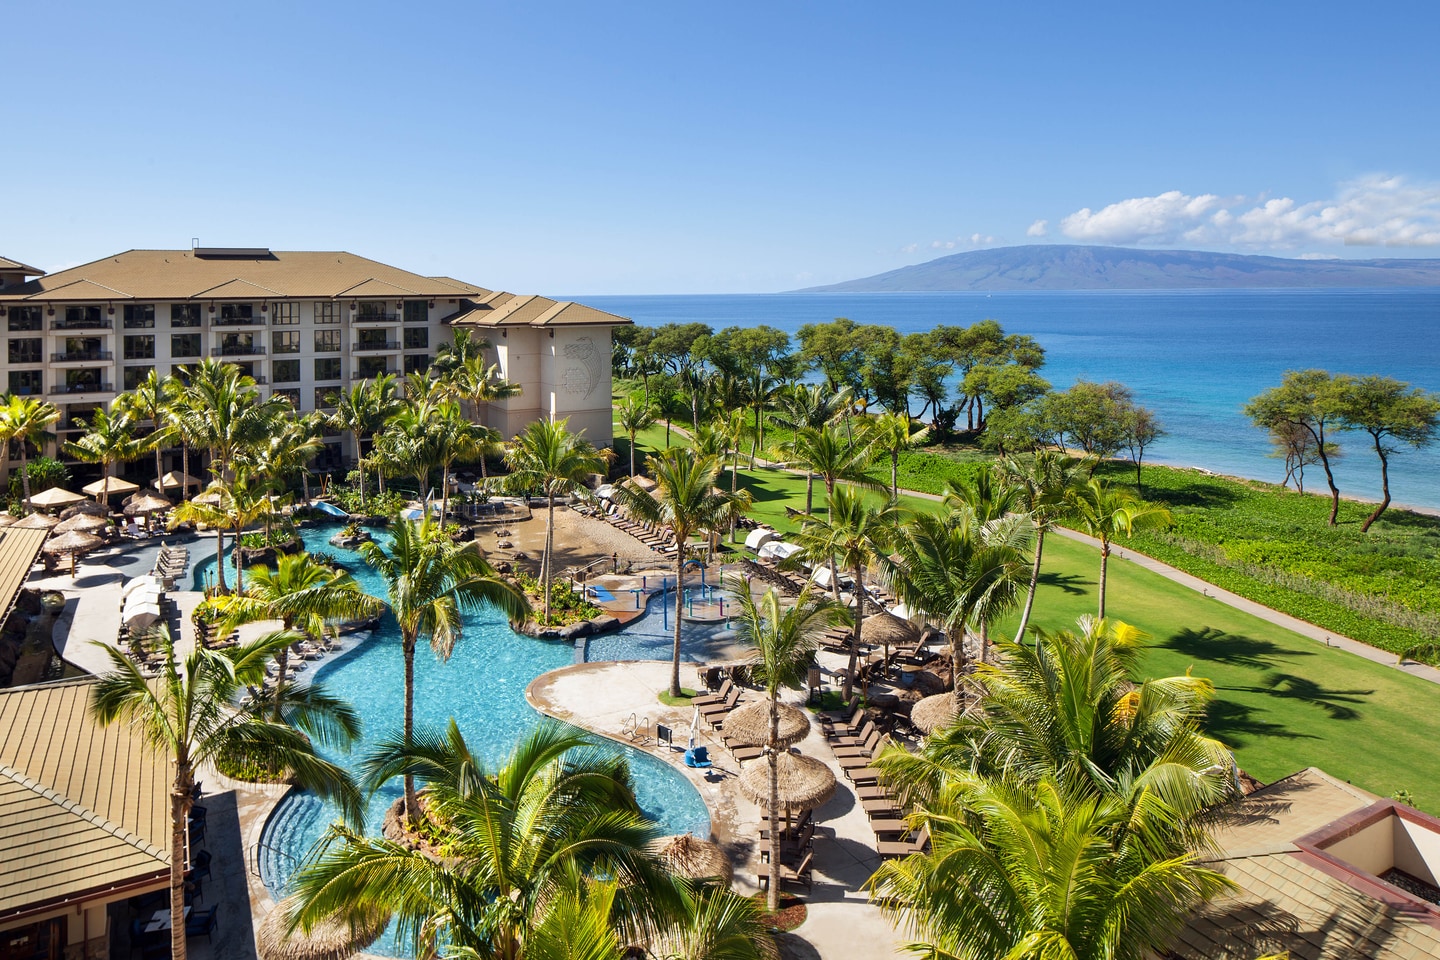 Best Marriott Bonvoy Category 6 and Category 7 Off-Peak Hotels & Resorts in Hawaii For Your Marriott Free Night Certificate